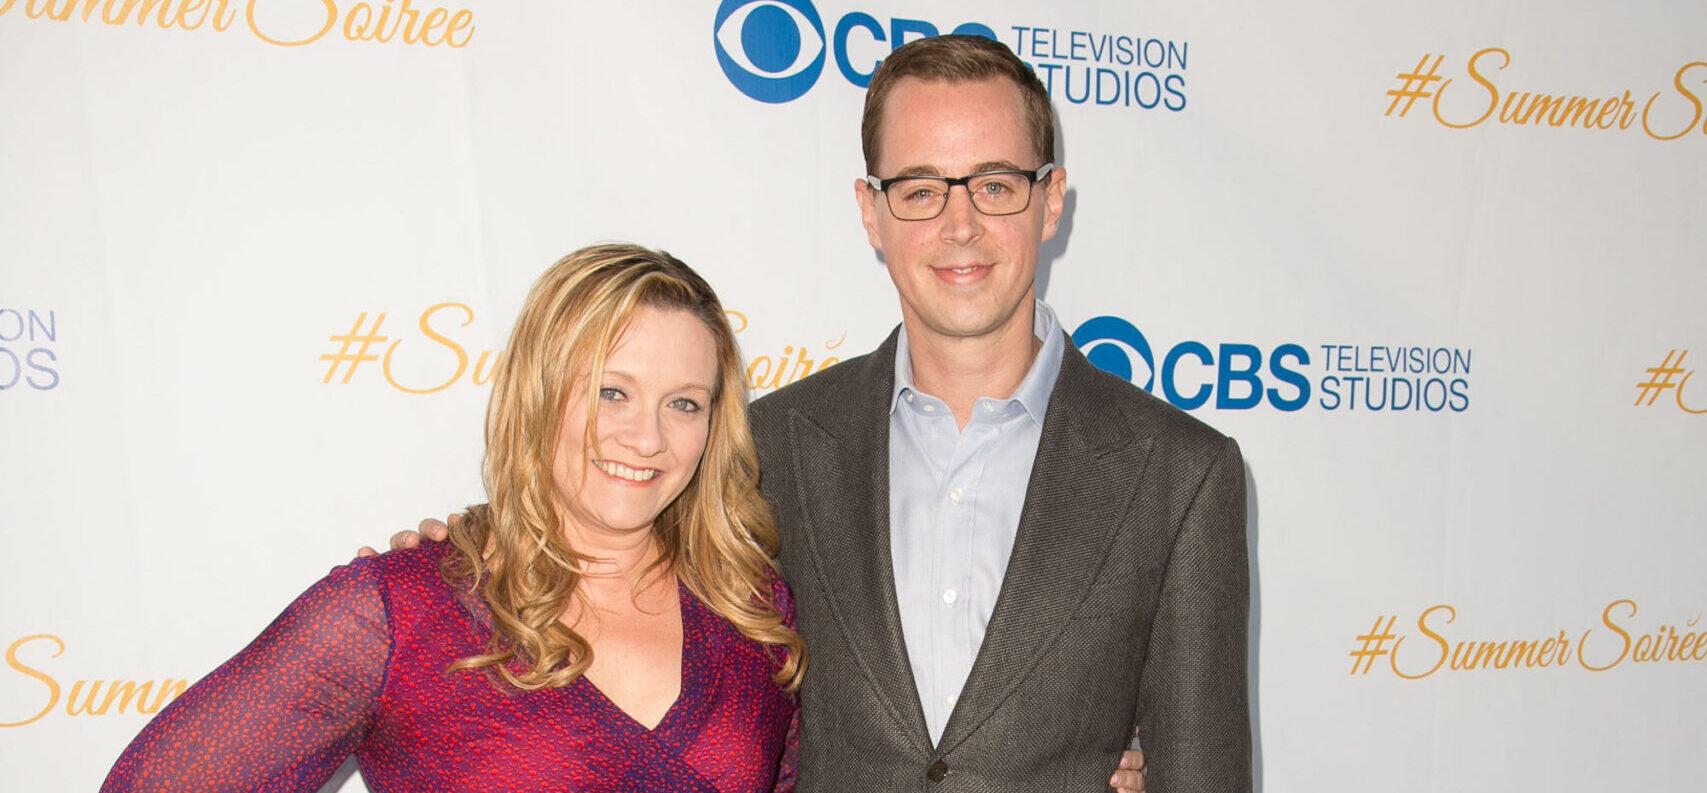 ‘NCIS’ Star Sean Murray’s Wife Files For Divorce After 19 Years Together